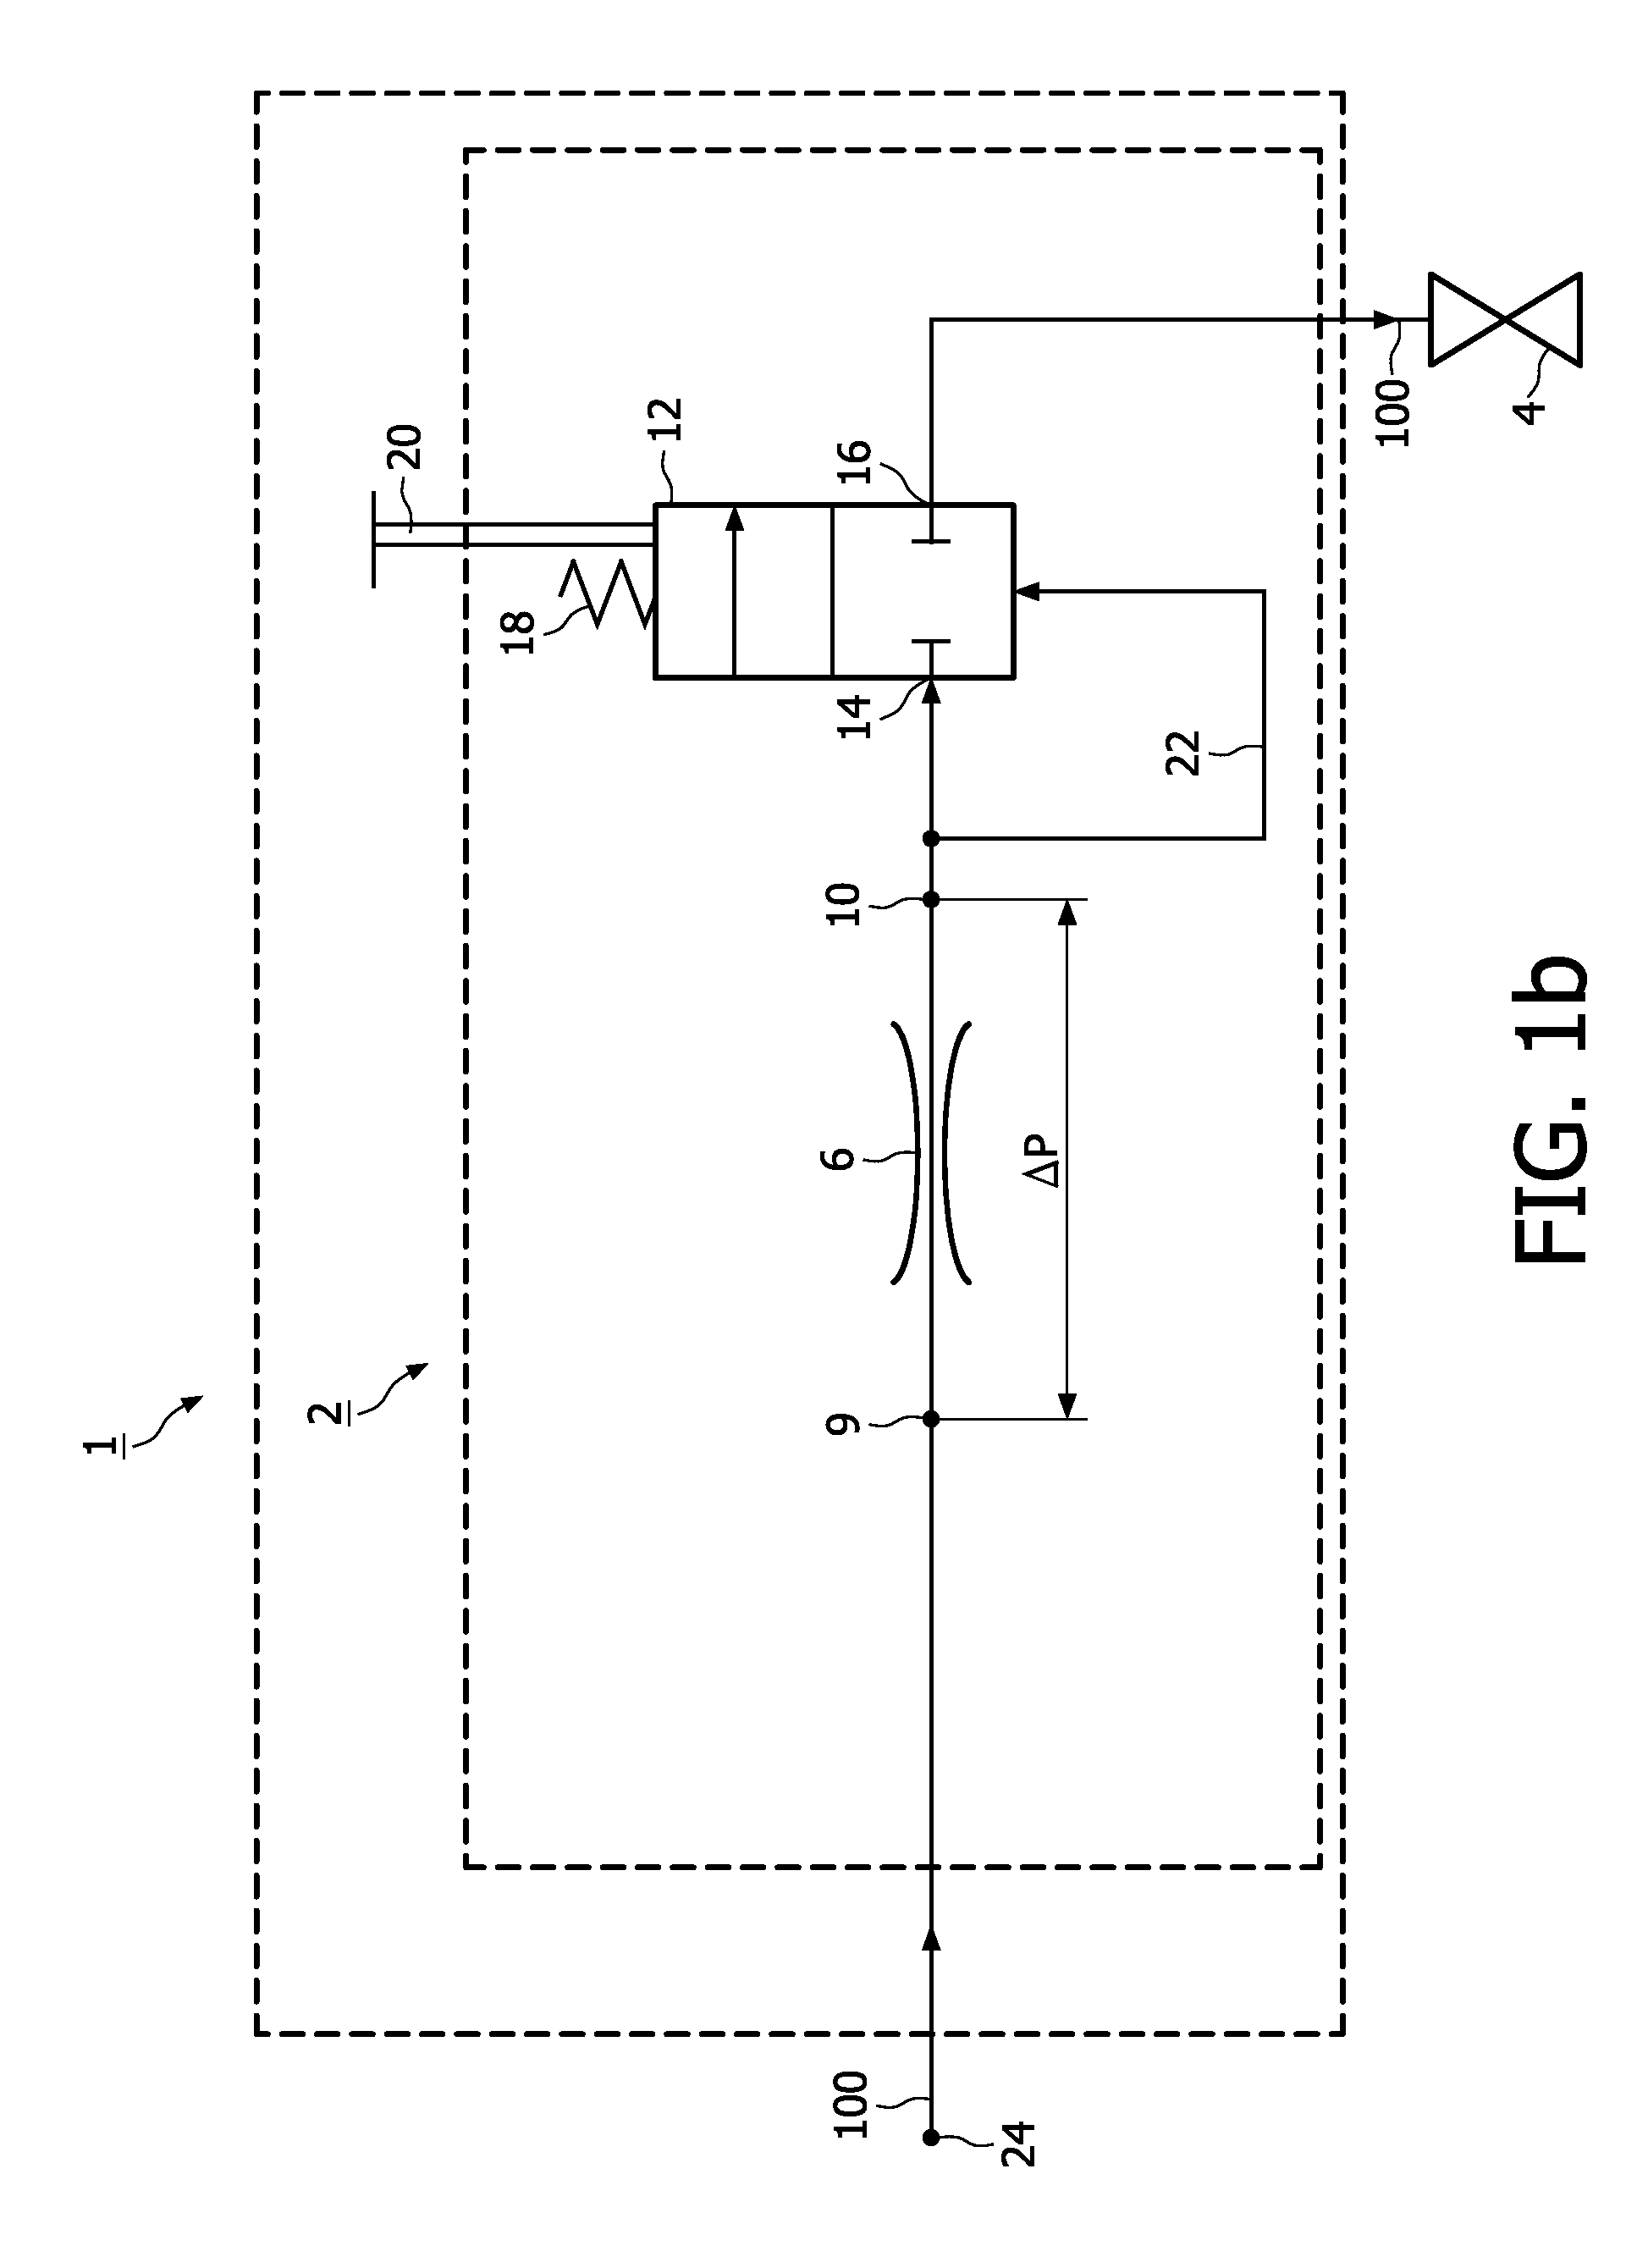 Water appliance having a flow control unit and a filter assembly